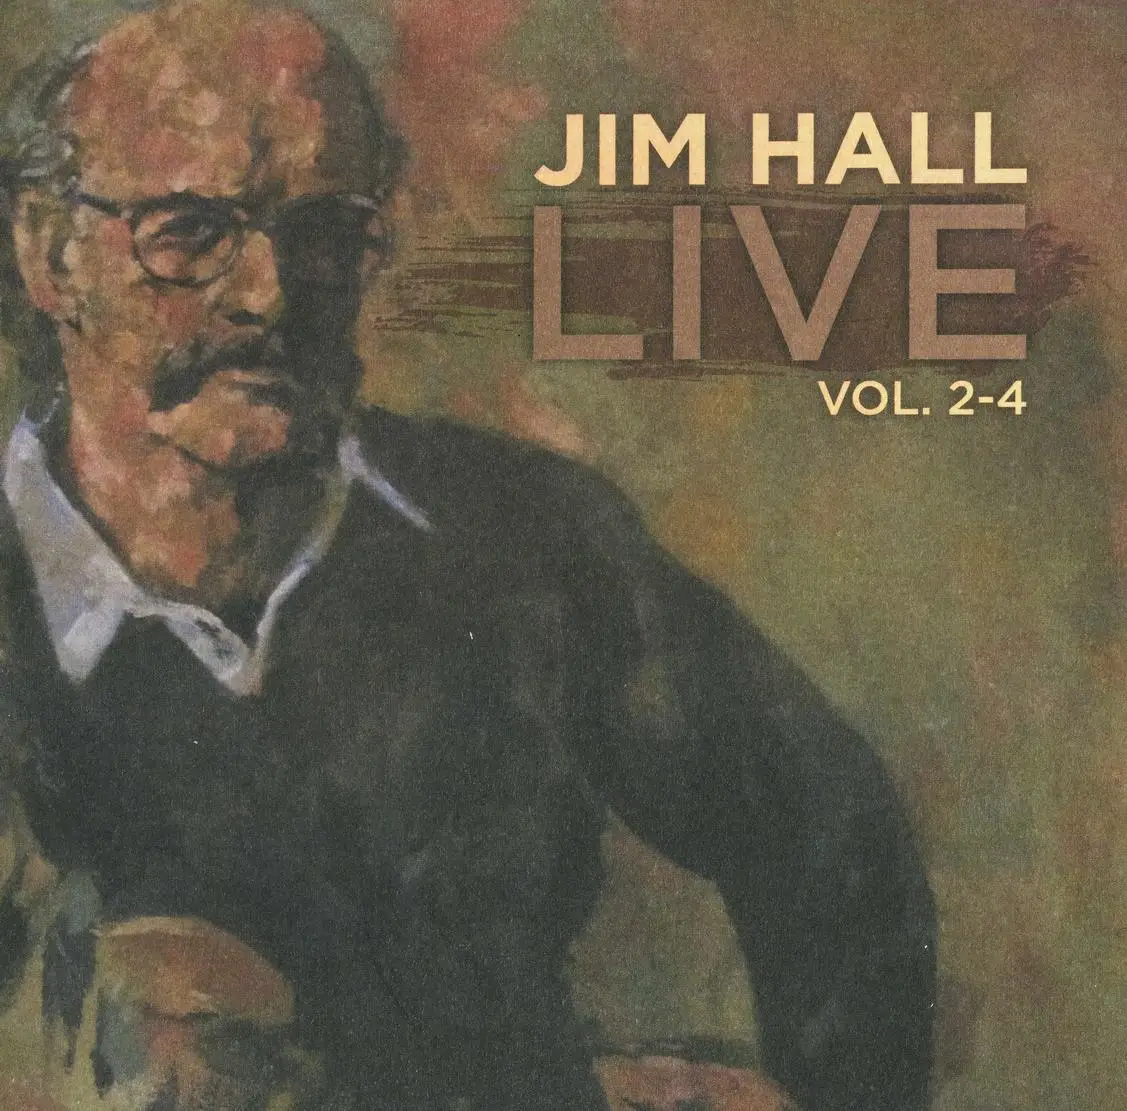 Jim Hall & friends - Live at Town Hall. James flac